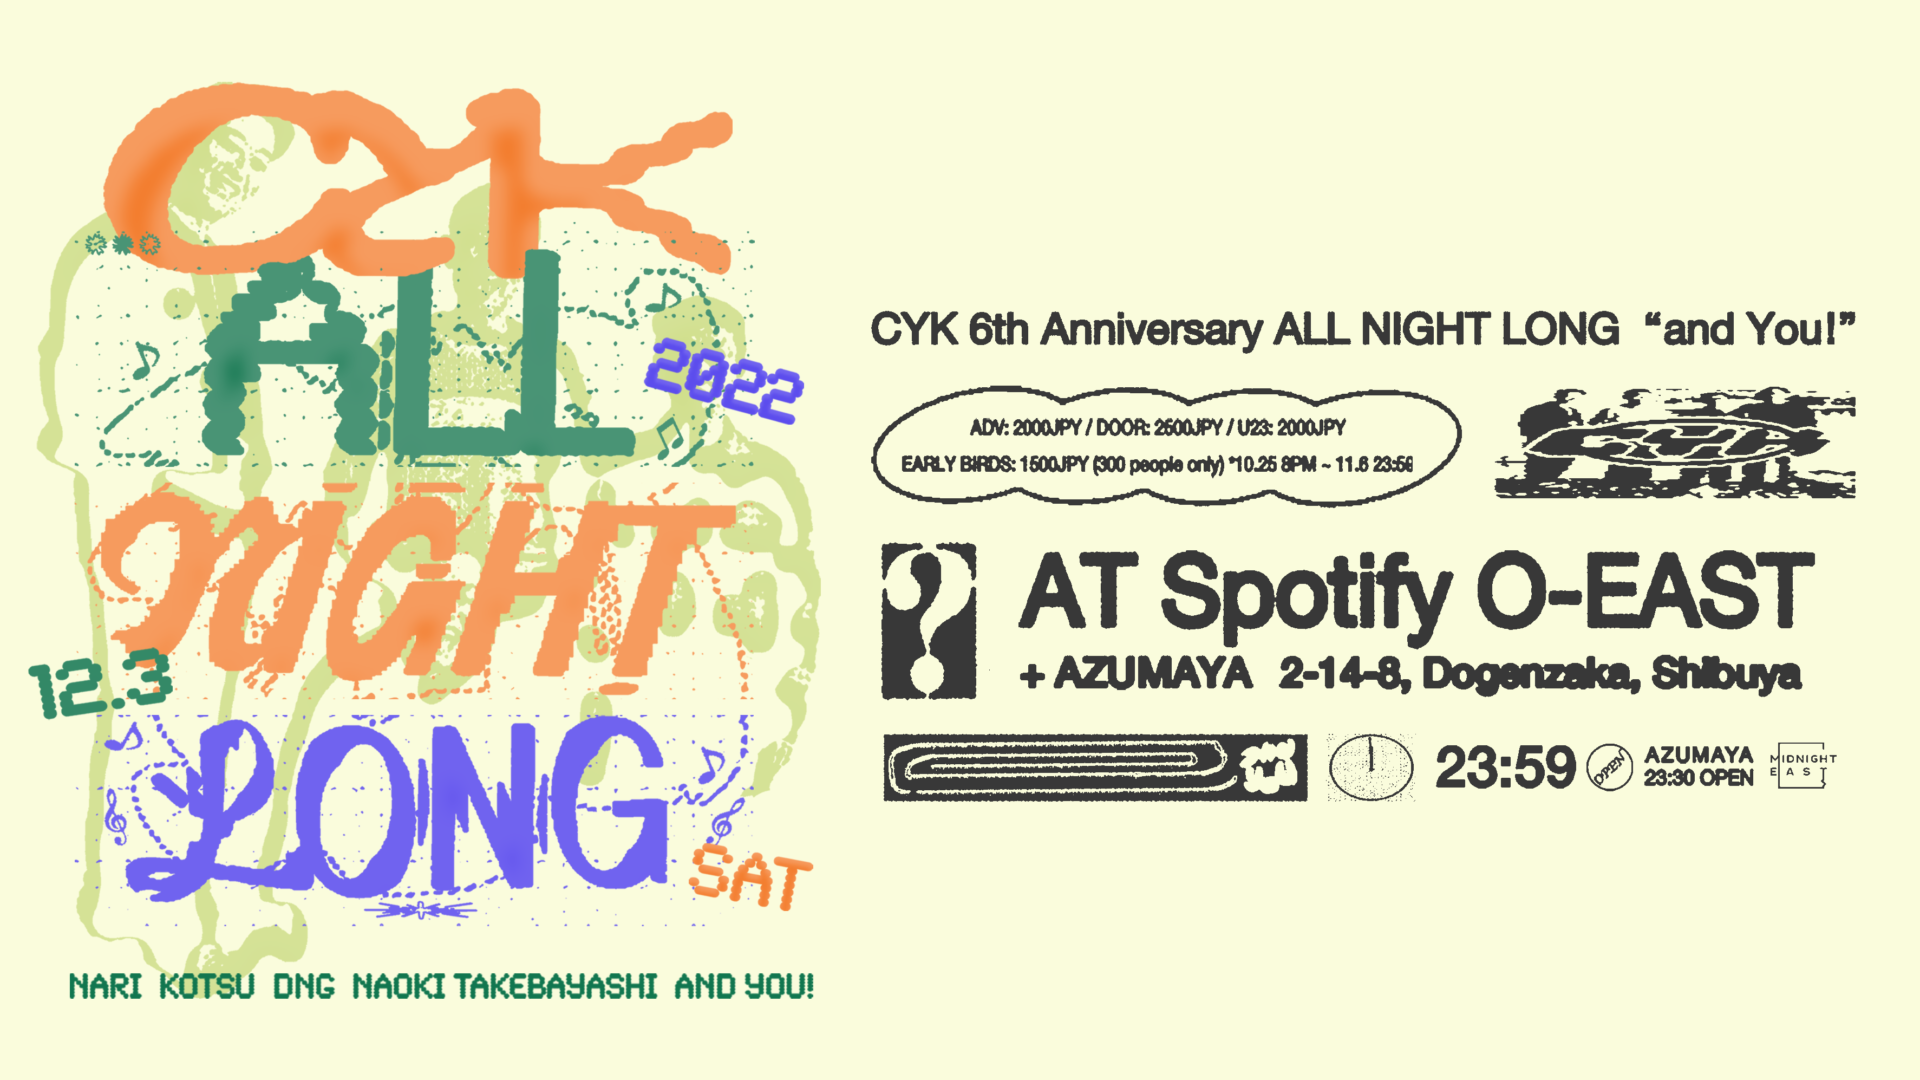 CYK 6th Anniversary. ALL NIGHT LONG “and You!”